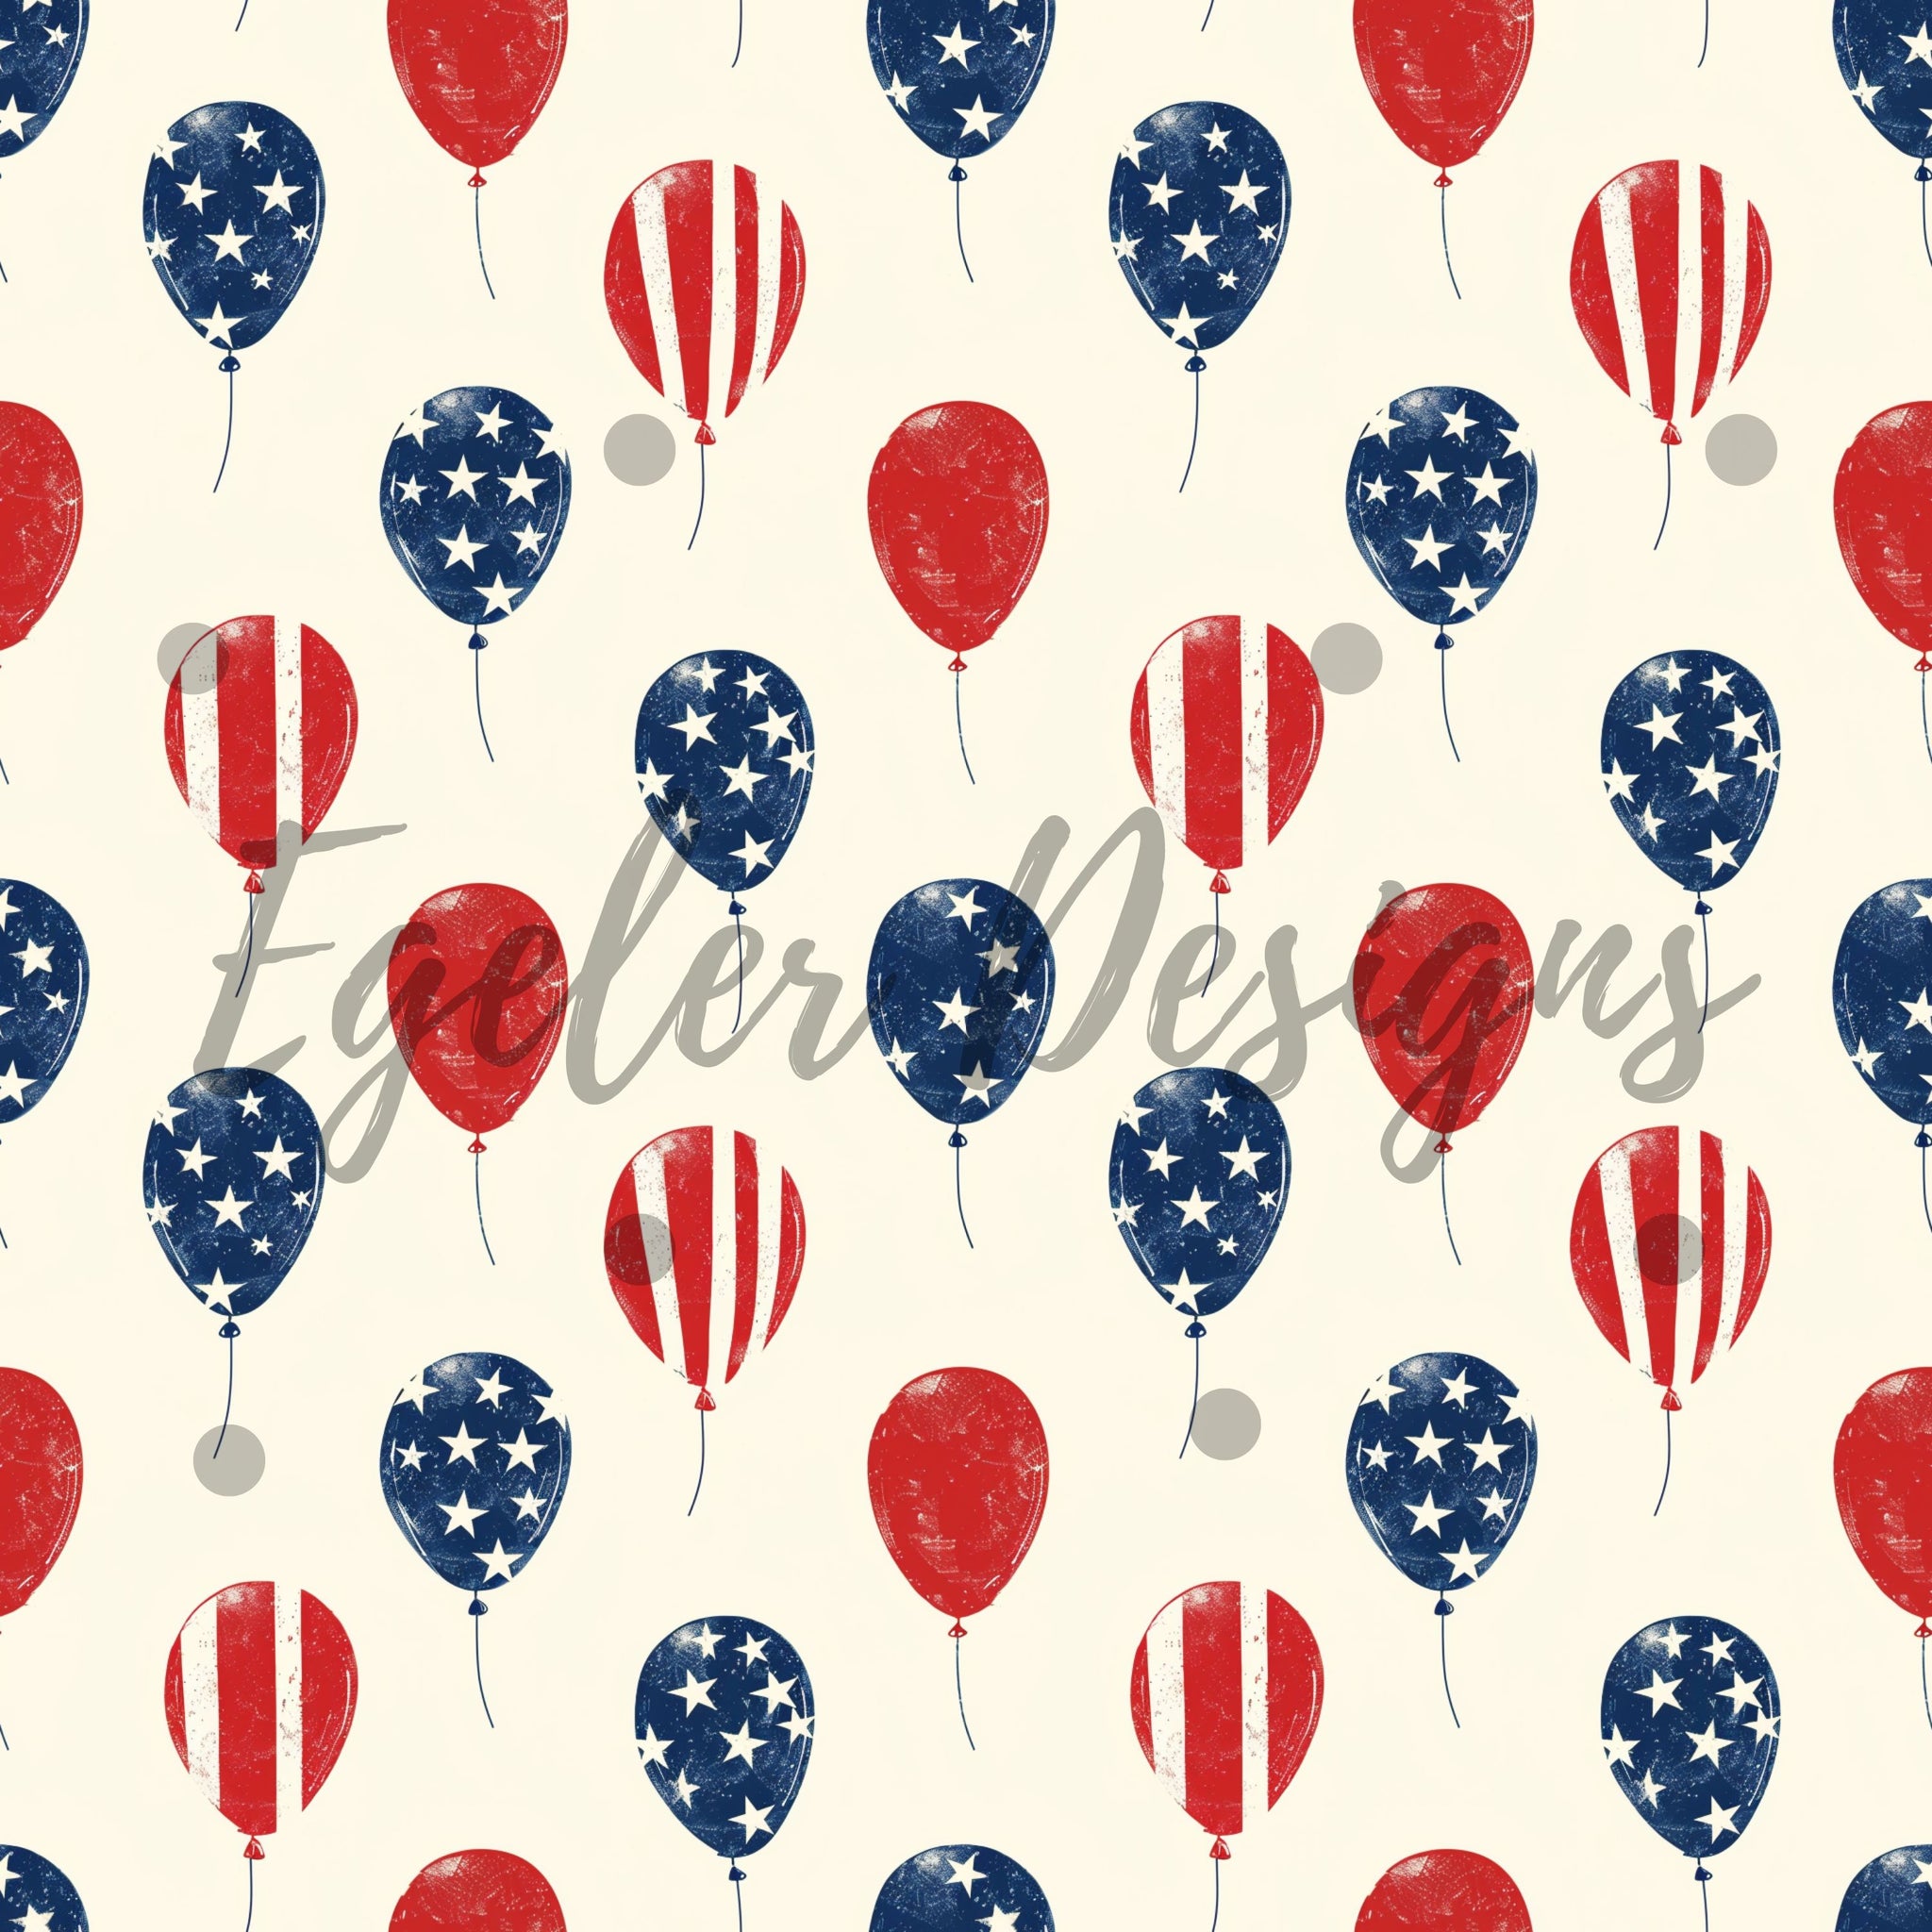 Vintage Balloons (LIMITED 20)